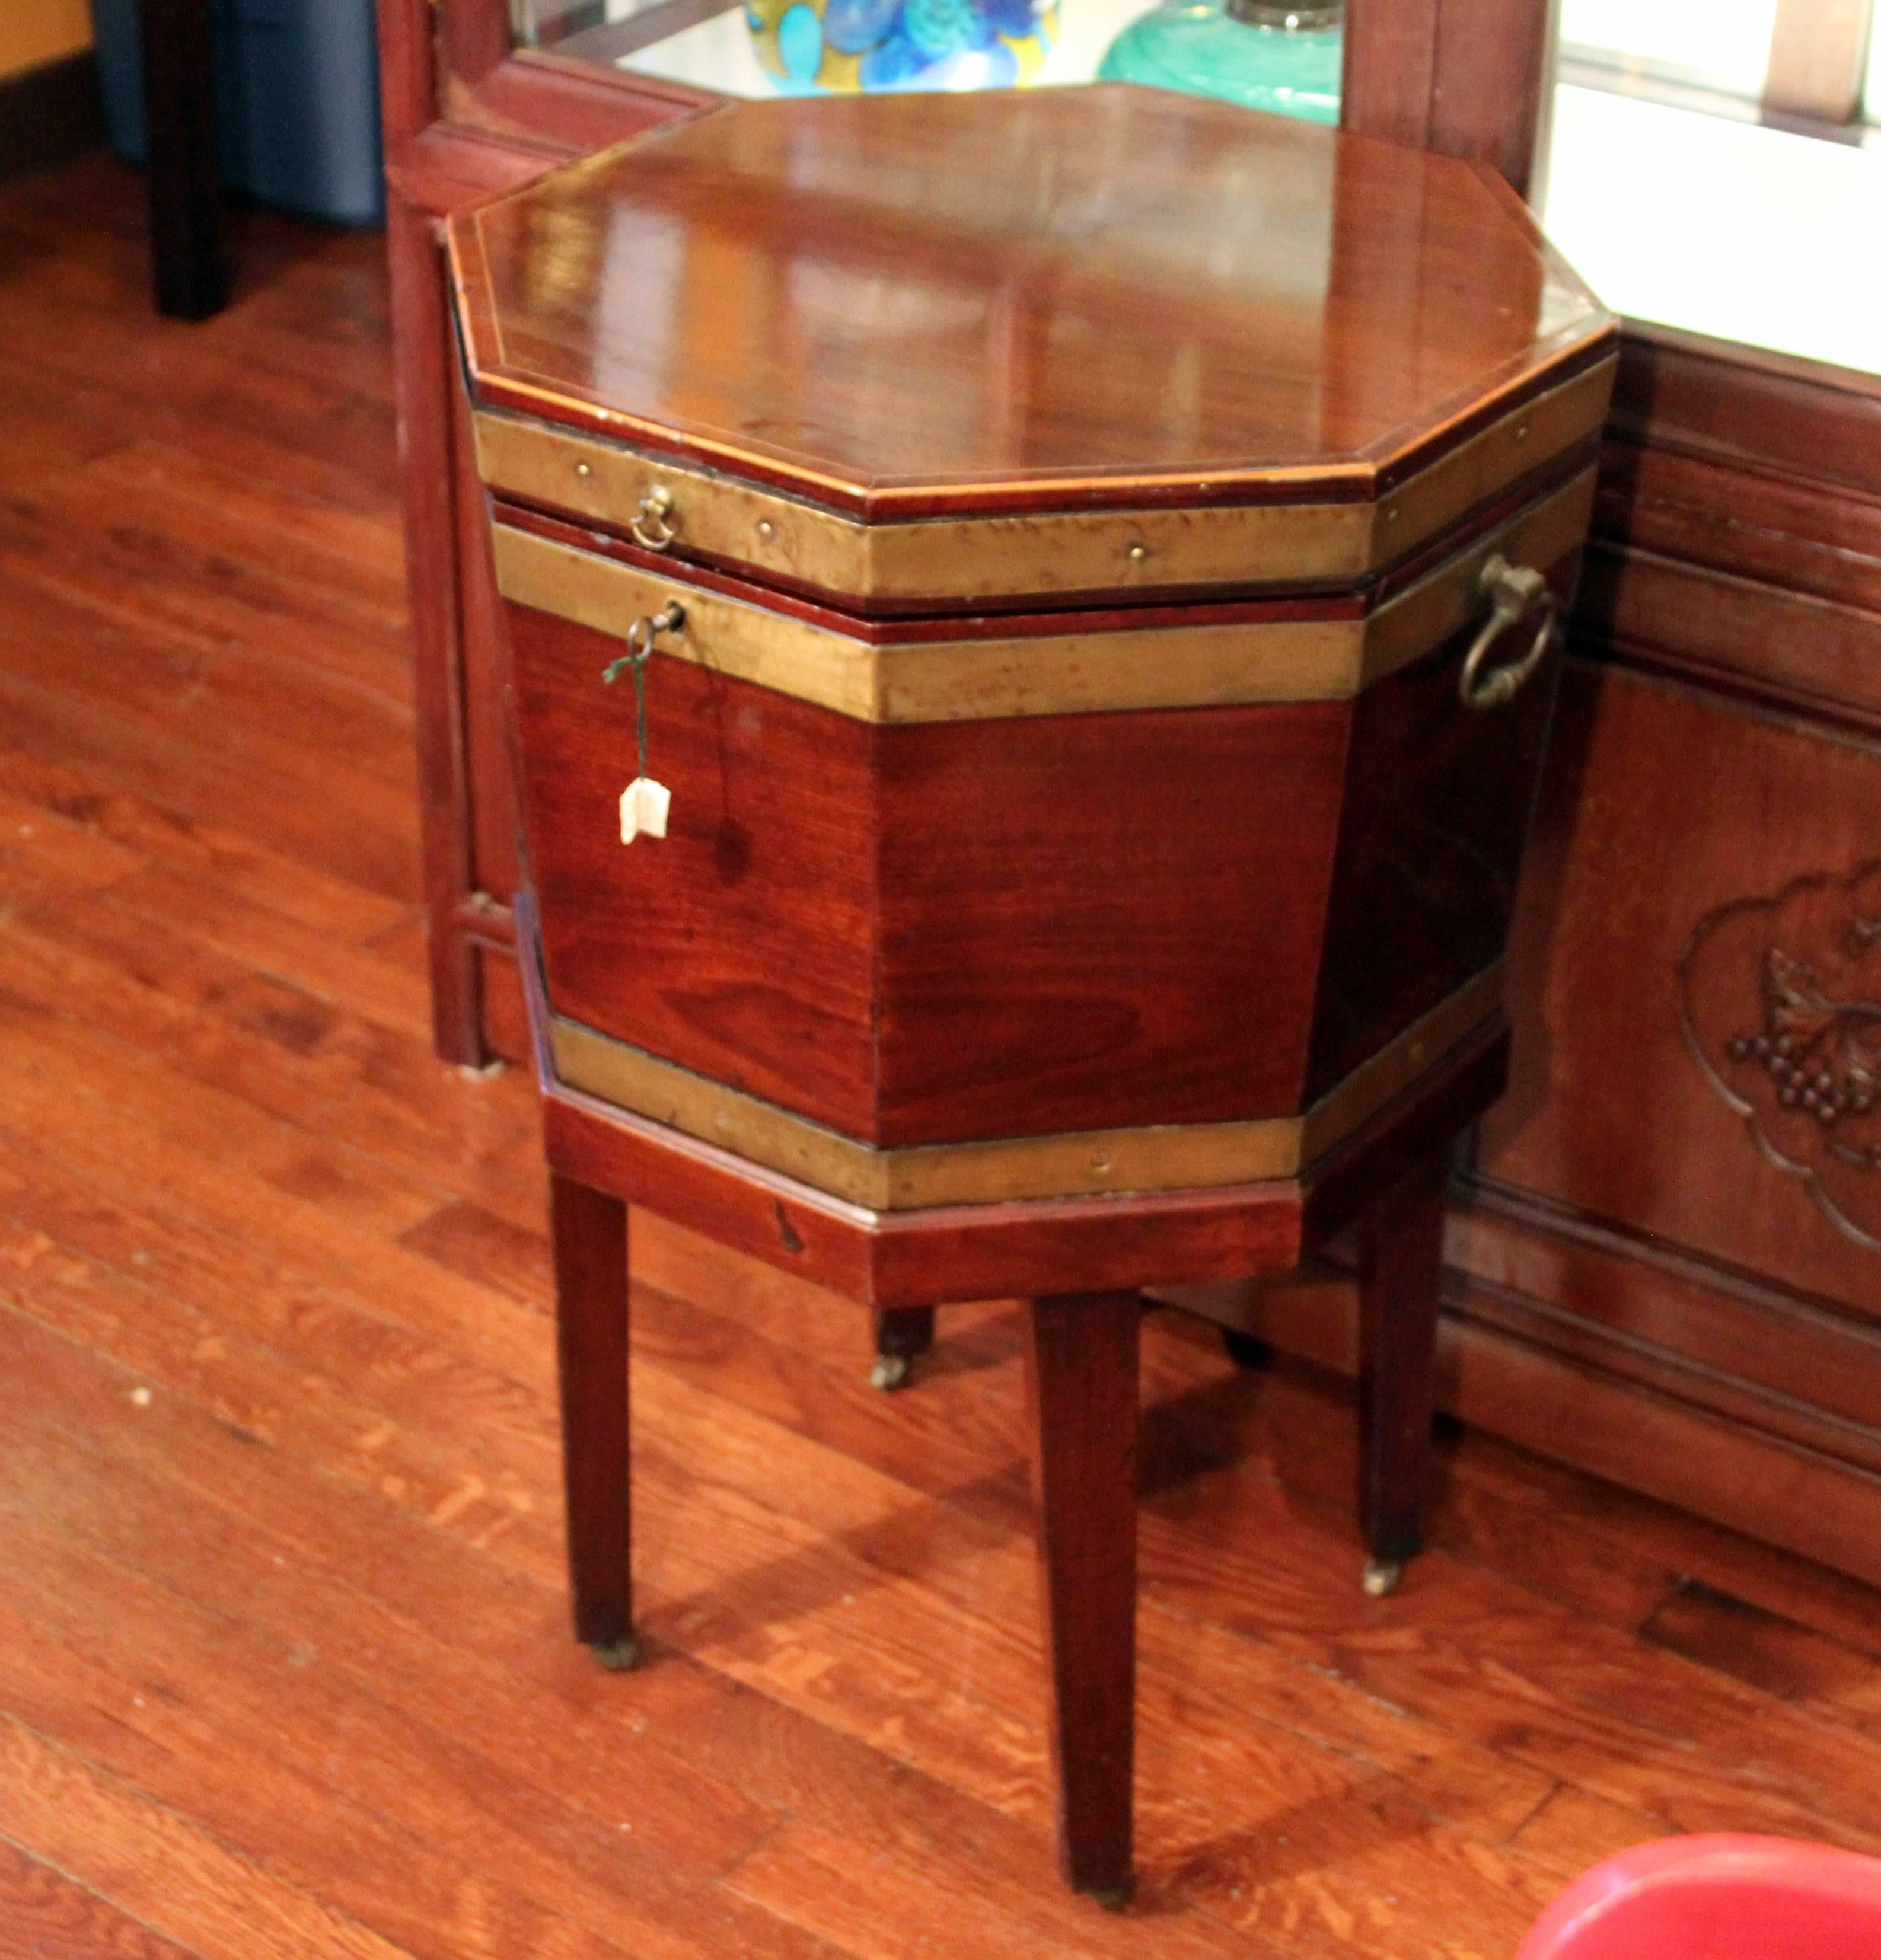 Antique English mahogany George III octagonal cellarette, circa late 18th century. With brass hardware, original key, and inlaid banding at border. A good example of this popular cellarette, which can also be used as a side or lamp table. Measures: